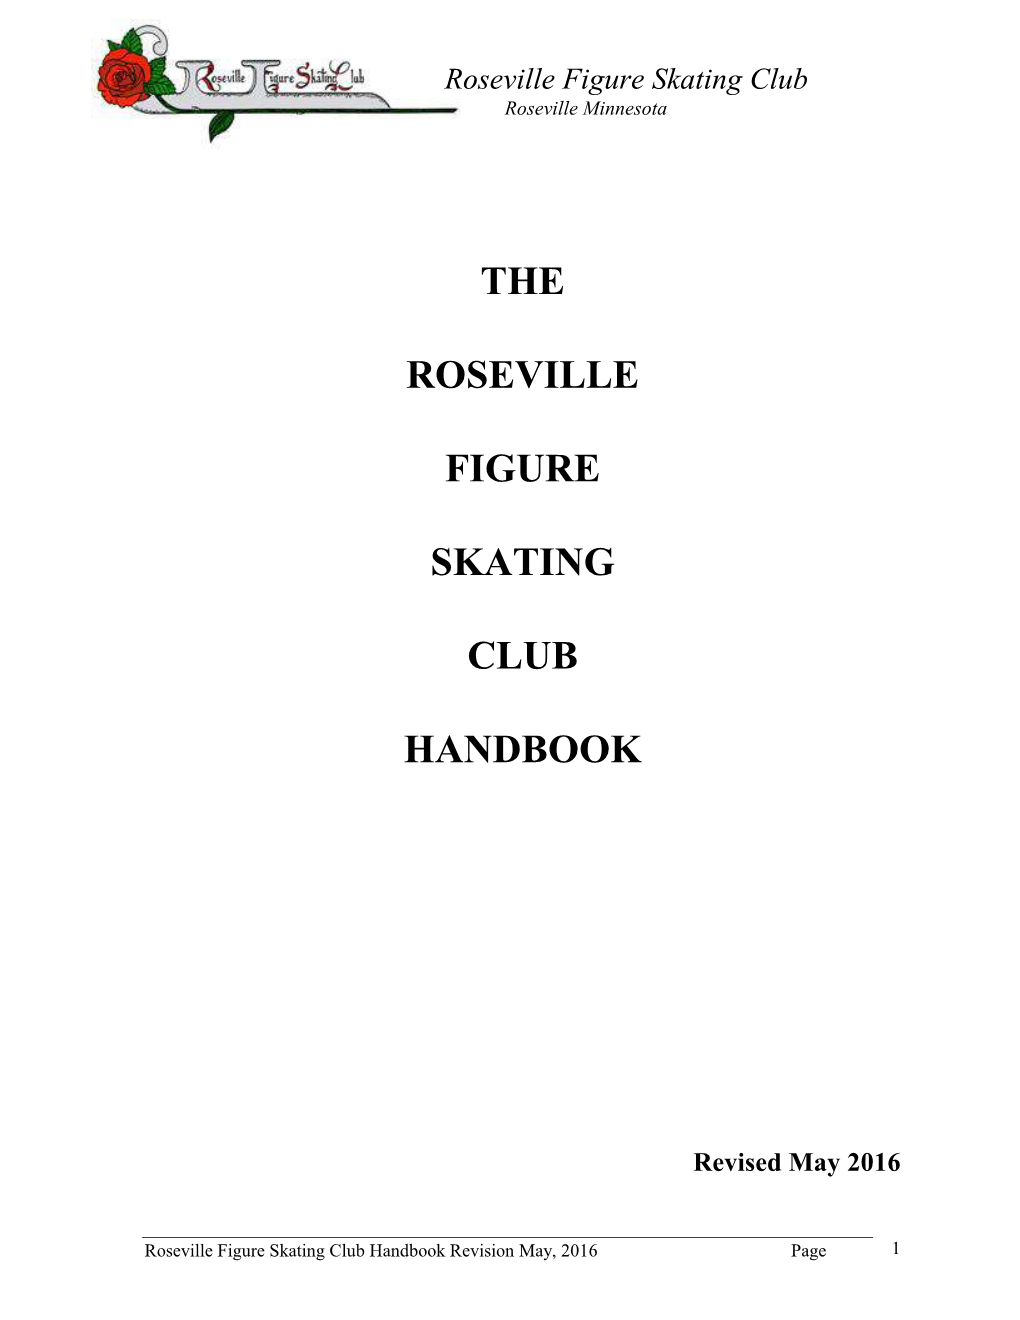 This Is the ROSEVILLE FIGURE SKATING CLUB HANDBOOK It